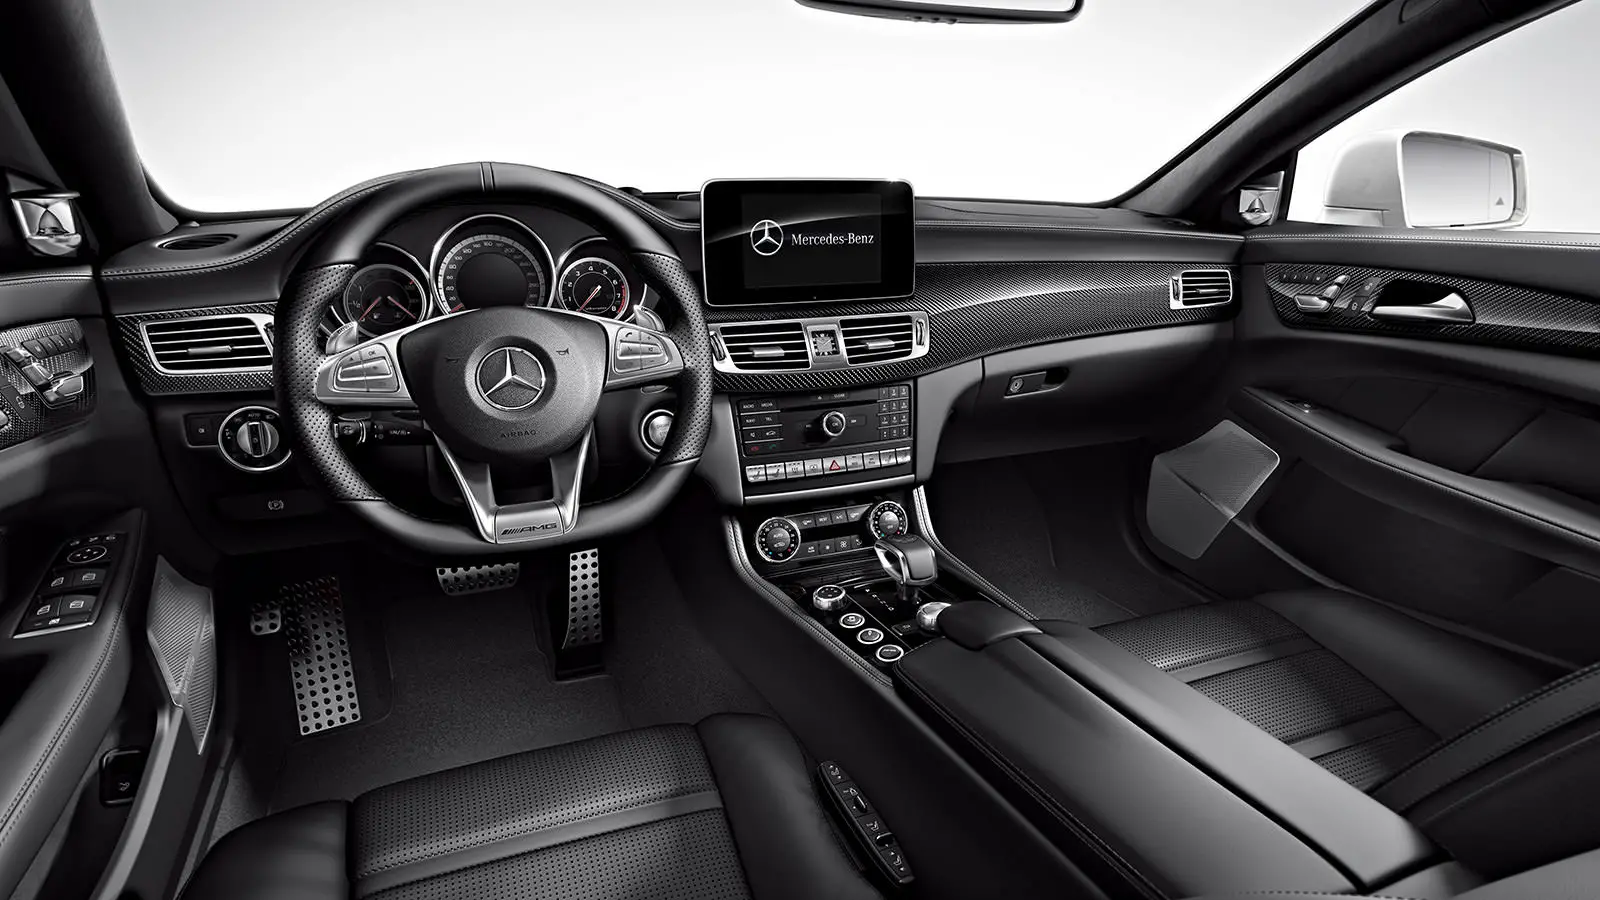 Mercedes Benz AMG CLS 63 interior front view